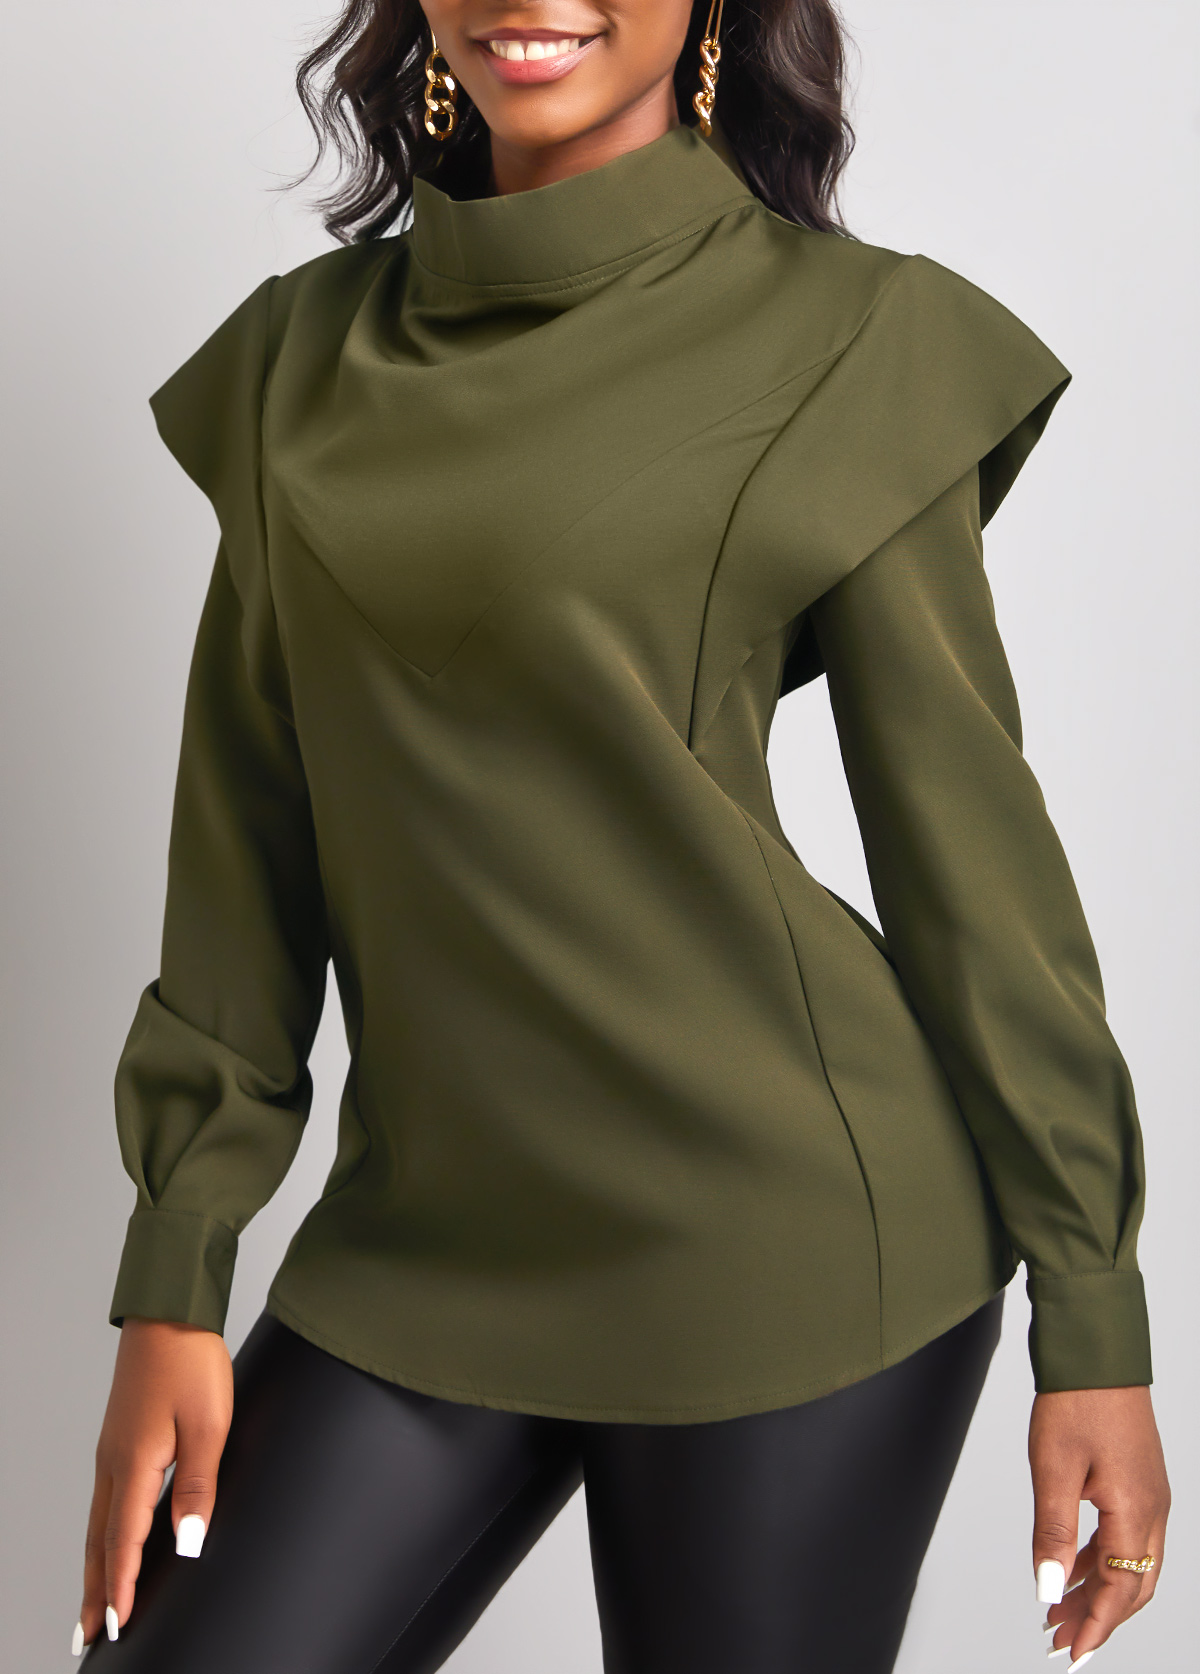 High Neck Olive Green Long Sleeve Blouse